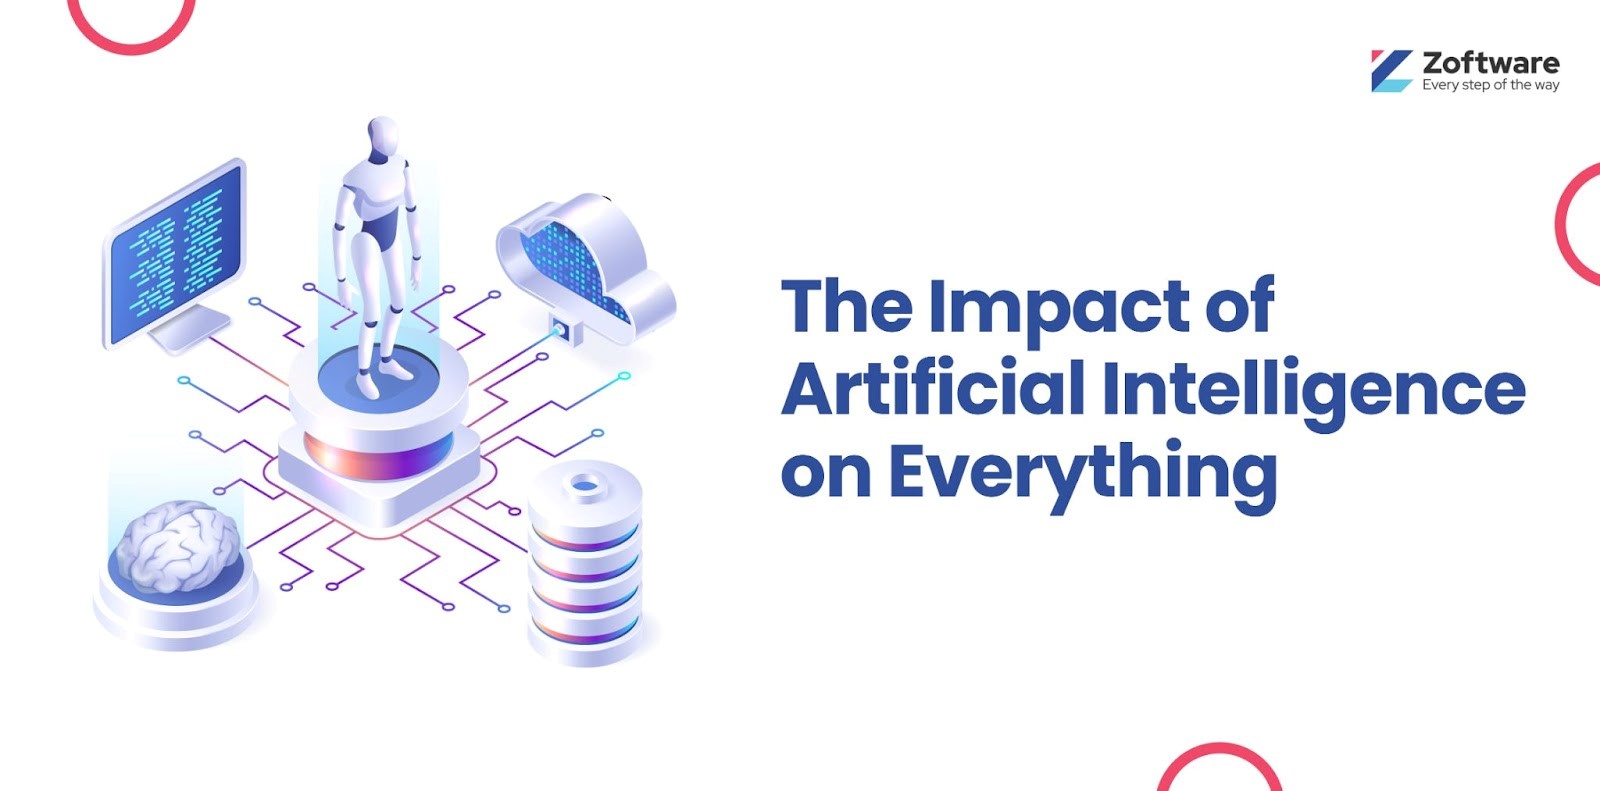 The AI Revolution: How Artificial Intelligence is Changing Everything!